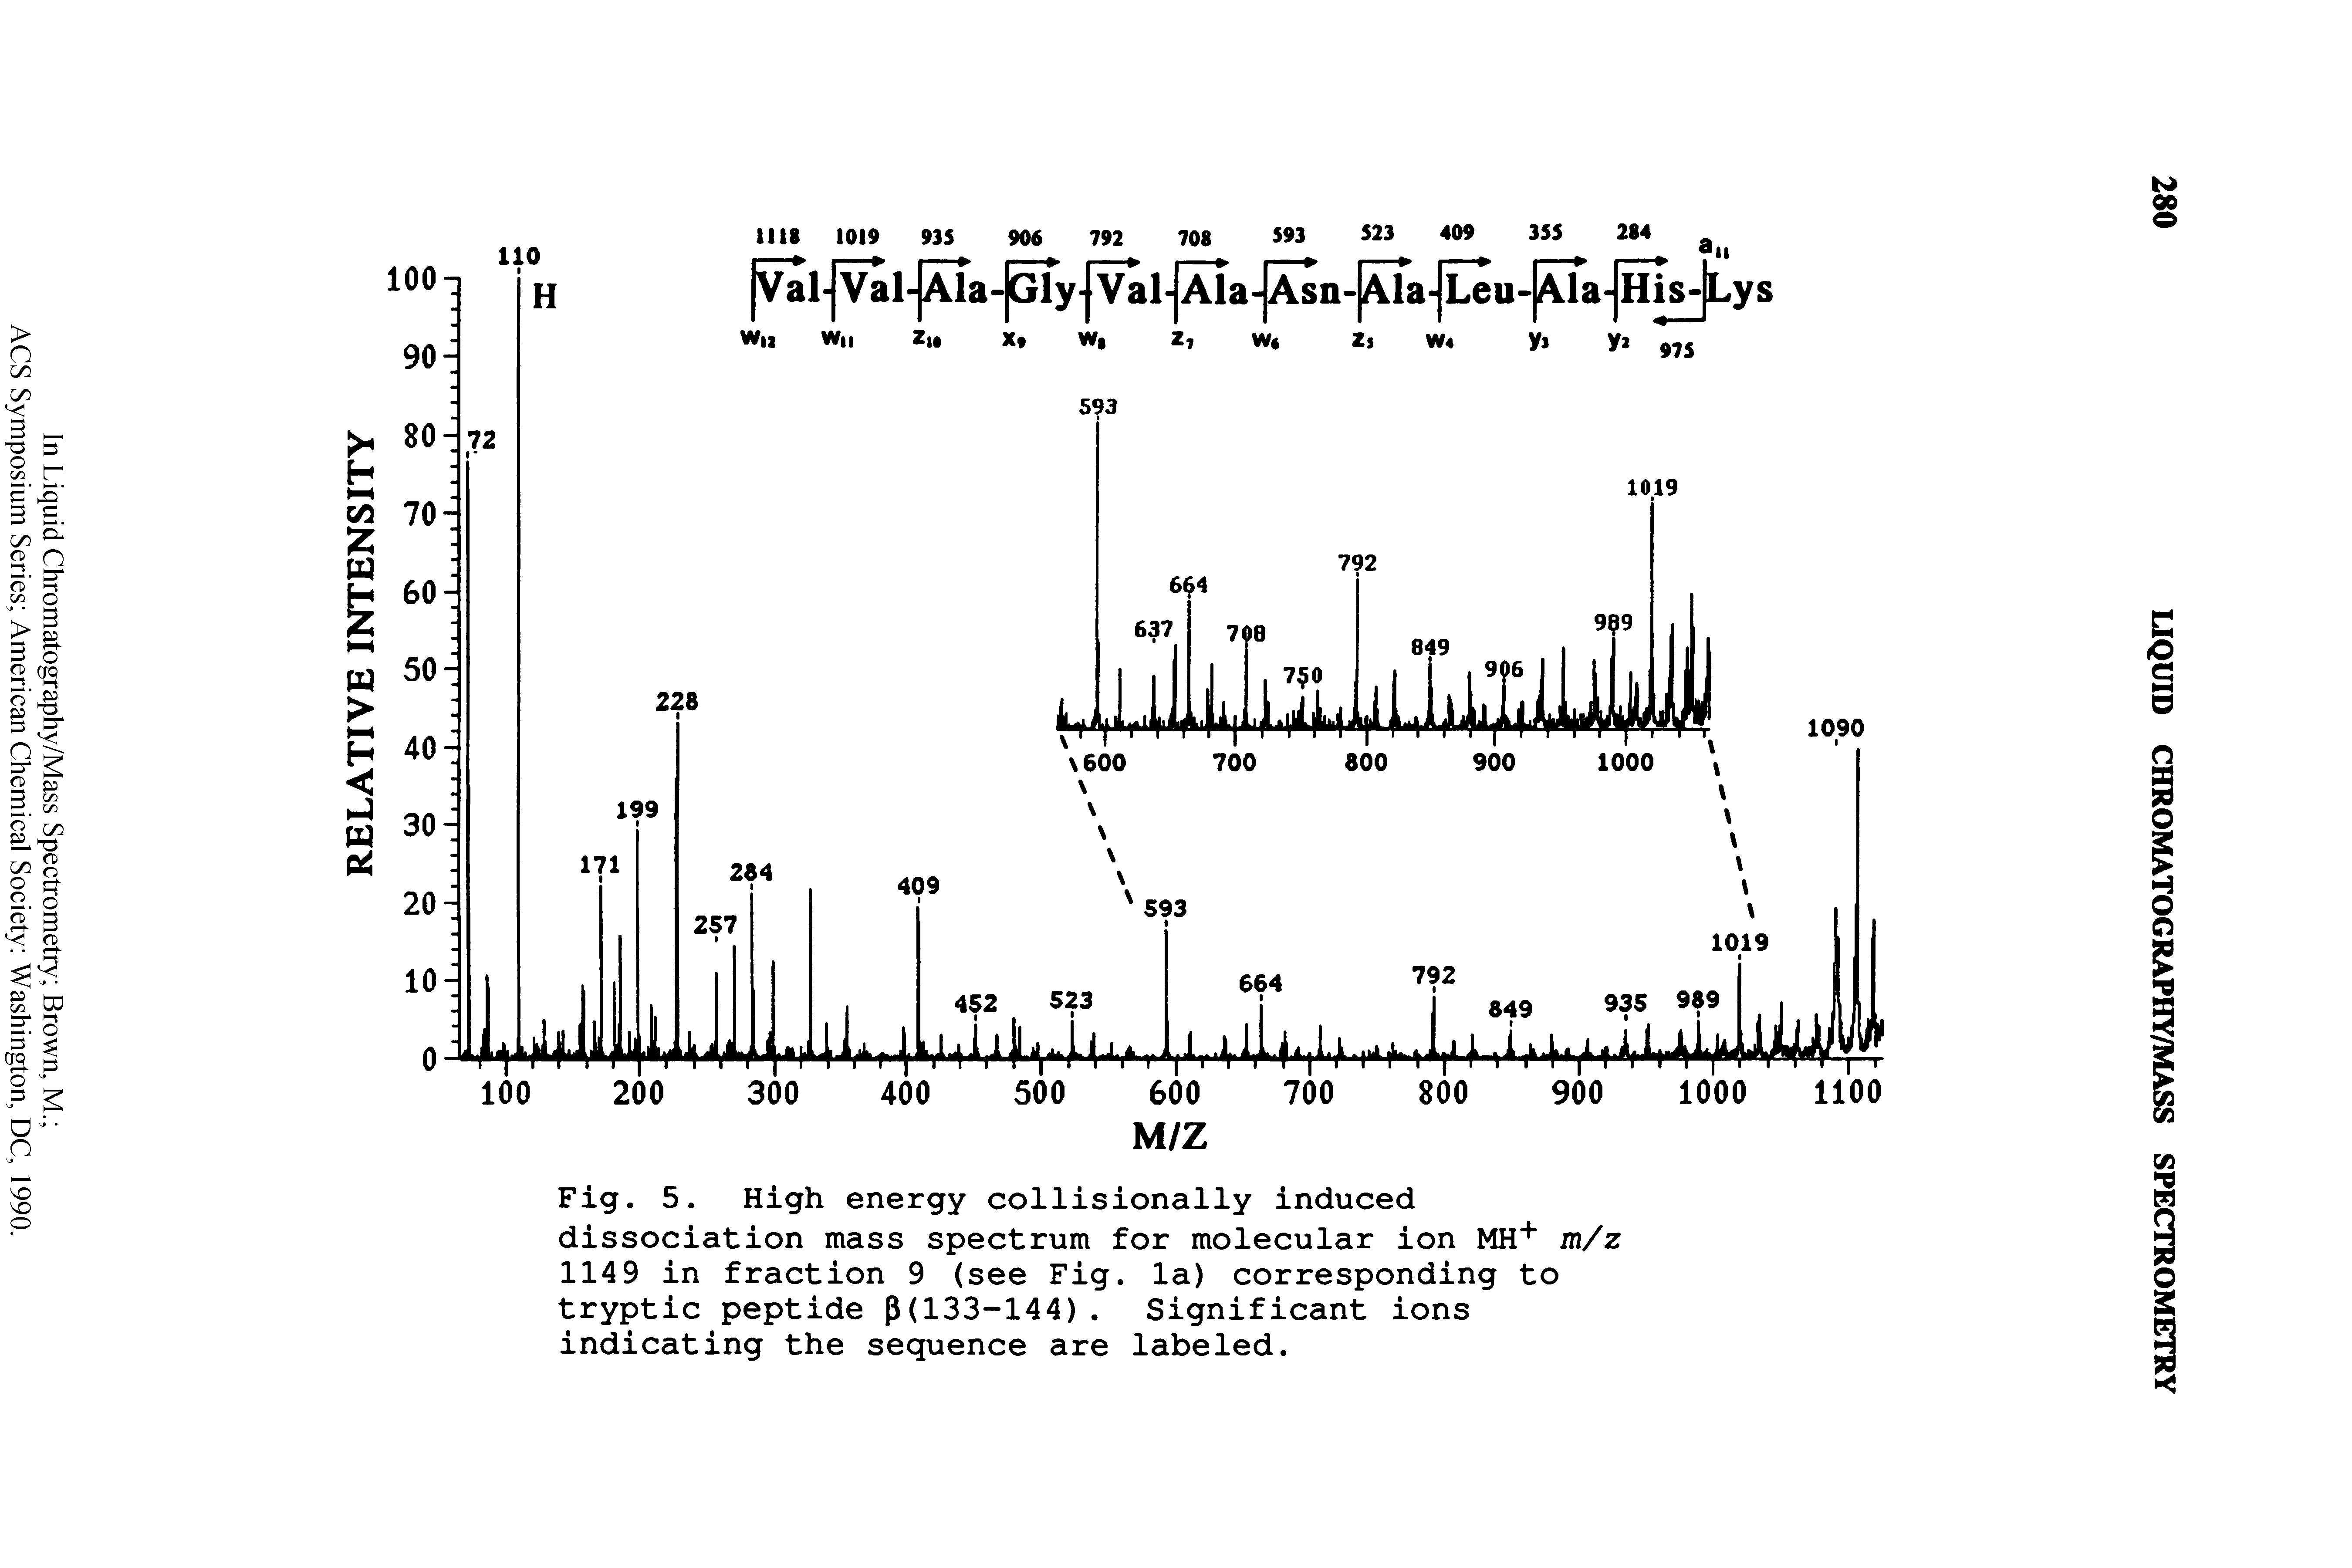 Fig. 5. High energy collisionally induced dissociation mass spectrum for molecular ion MH+ m/z 1149 in fraction 9 (see Fig. la) corresponding to tryptic peptide P(133-144). Significant ions indicating the sequence are labeled.